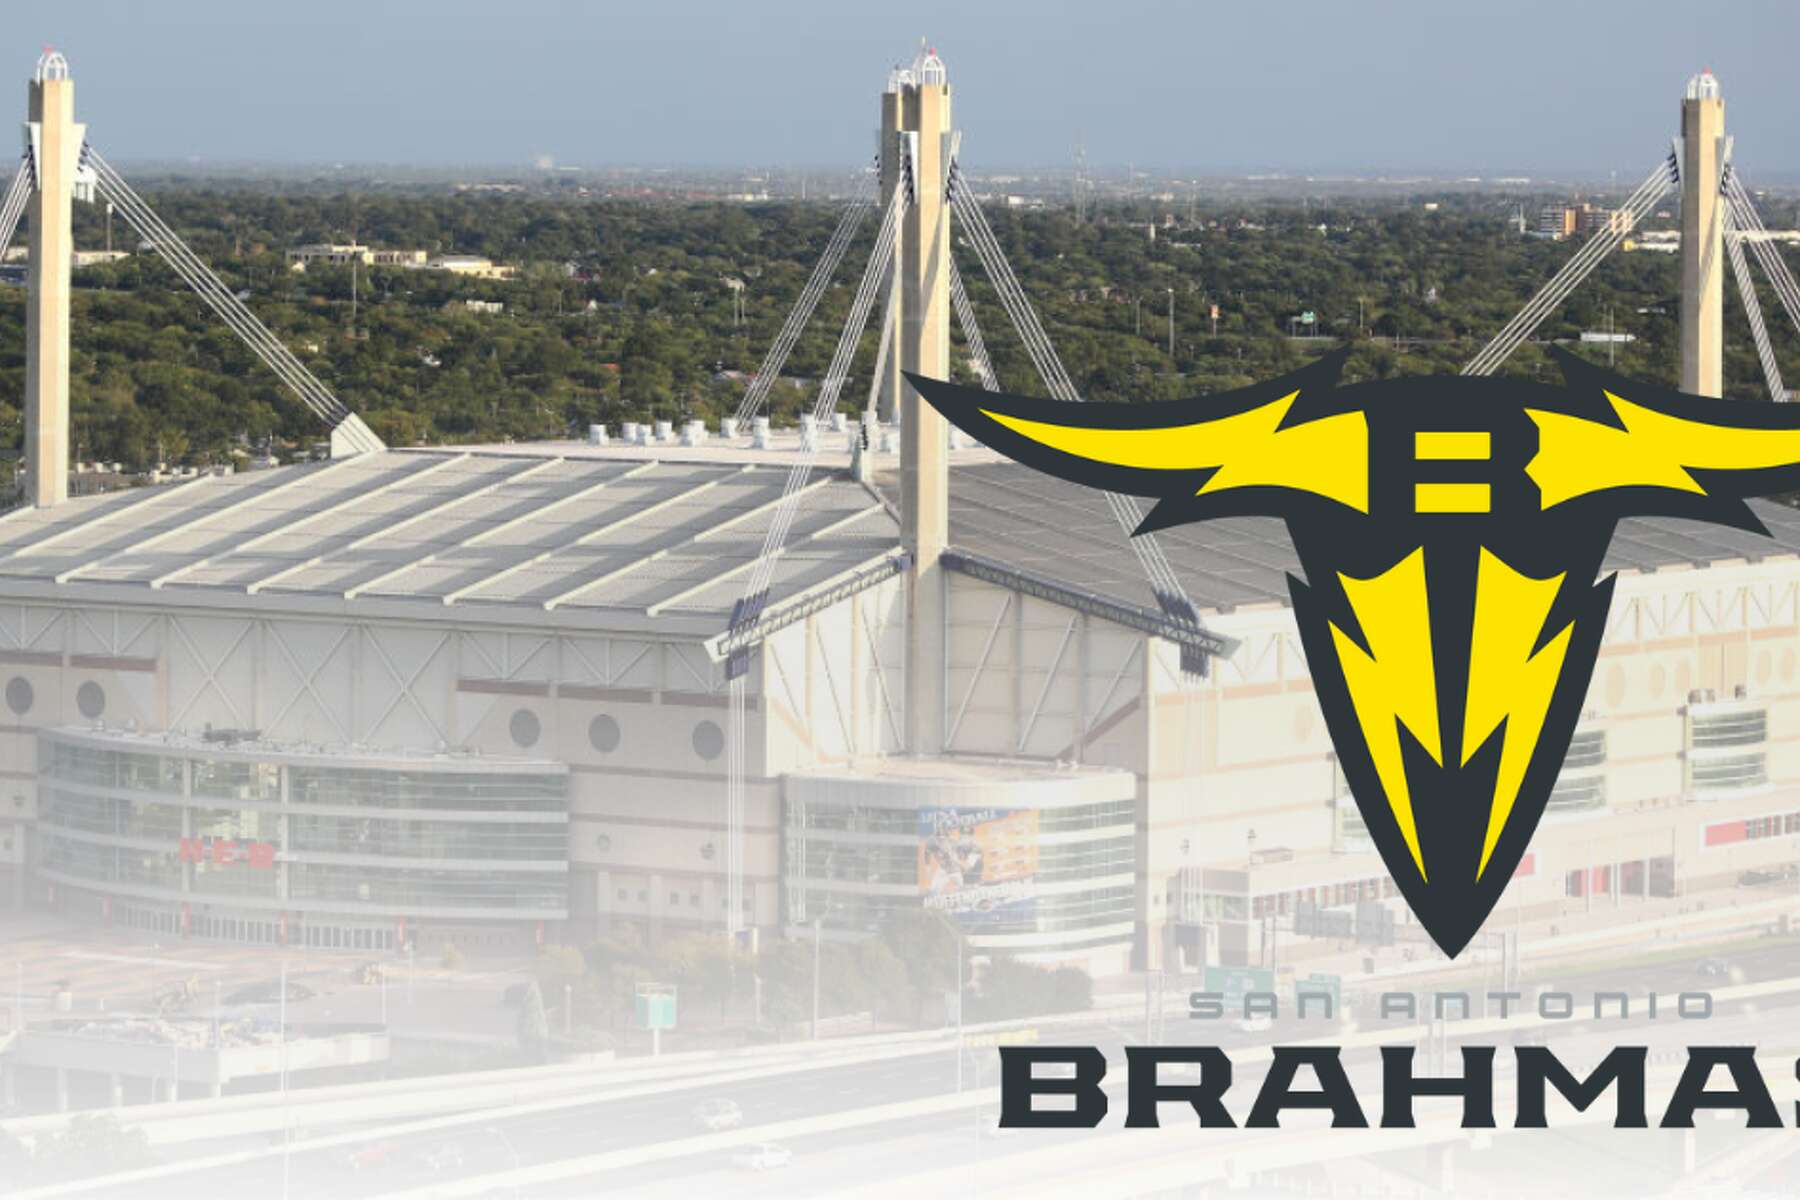 Here's what to know about San Antonio's XFL team, the Brahma's